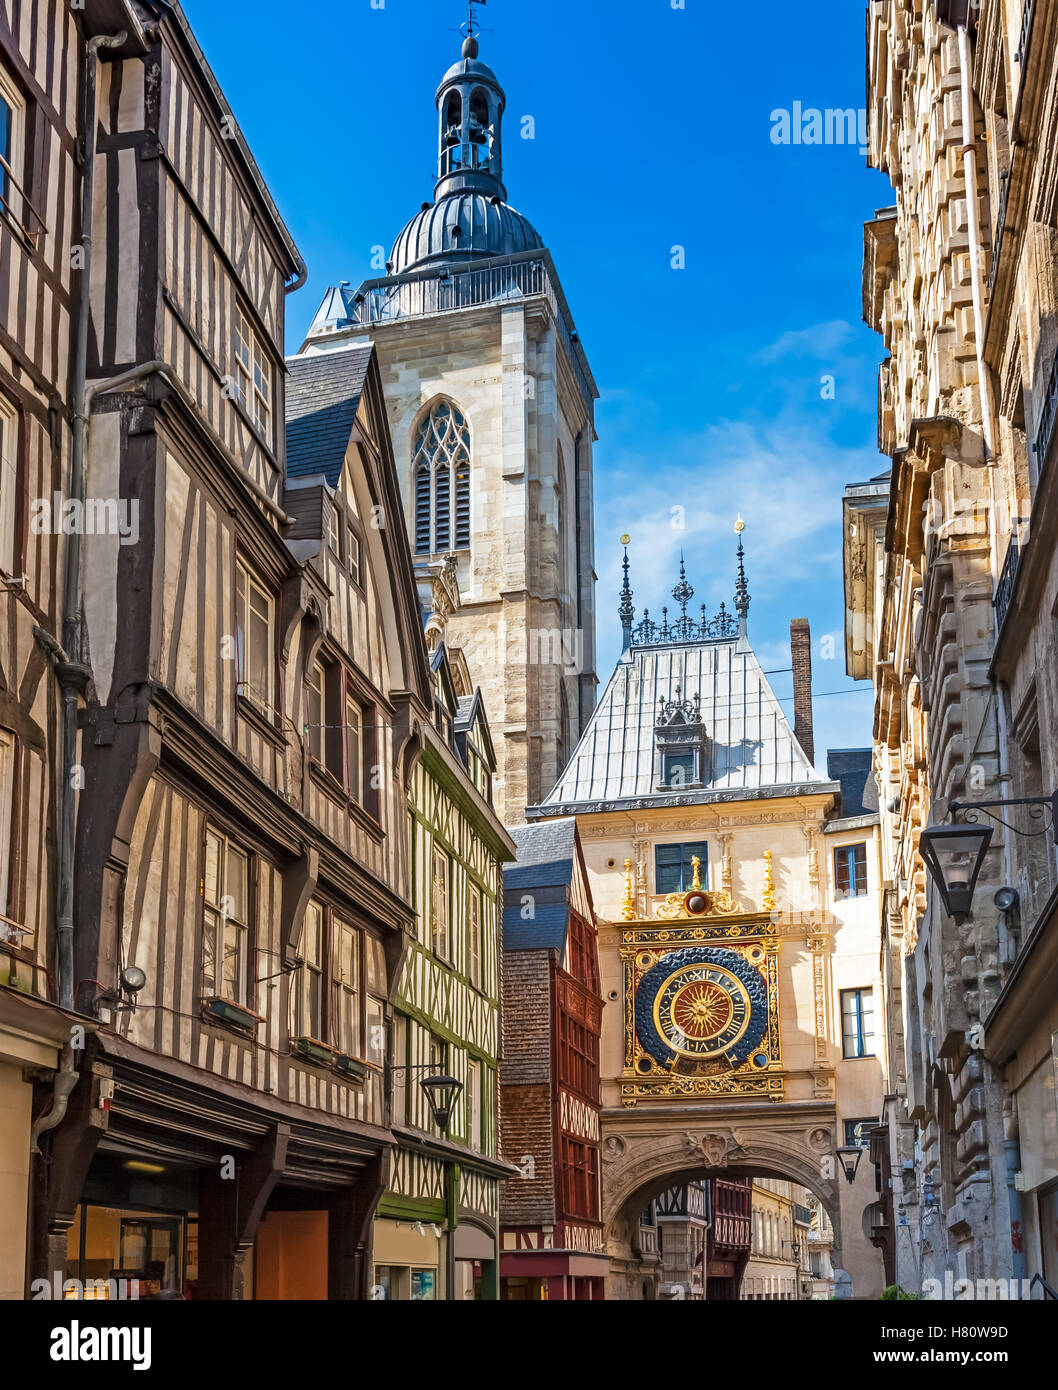 Famous half timbered Buildings and Horloge at Rouen, france, normandy, Stock Photo